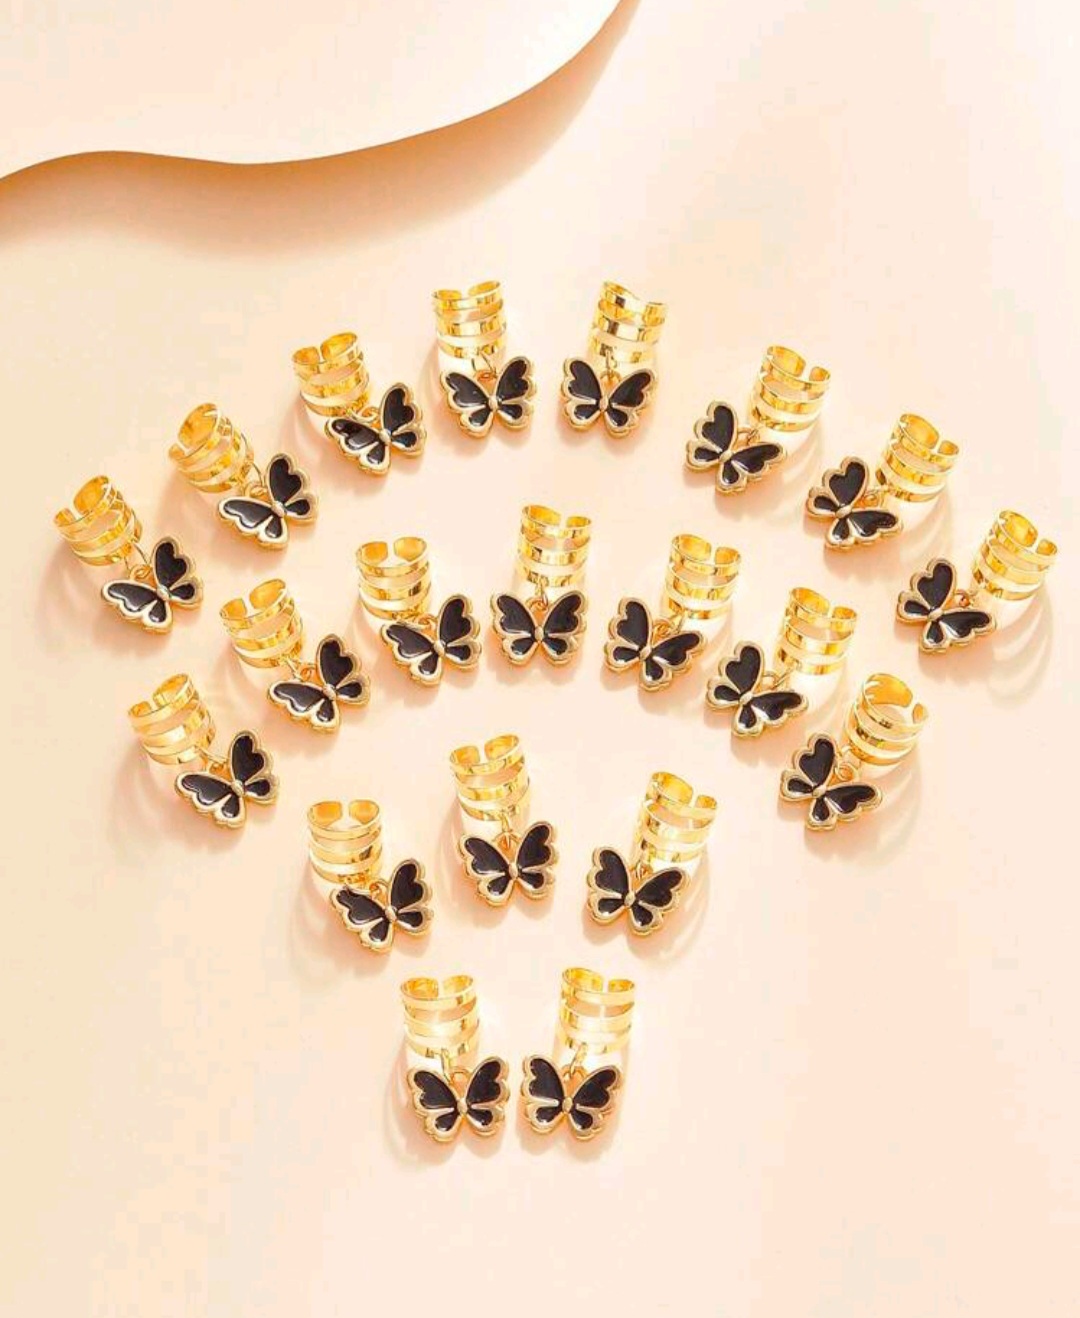 20pcs/Set Fashionable And Exquisite Black Butterfly Pendant Design Golden Hair Accessories Set Including Beaded Hair Hoops, Clips, Braiding Accessories, Metal Cuffs For Hair Braids, Etc. Unisex